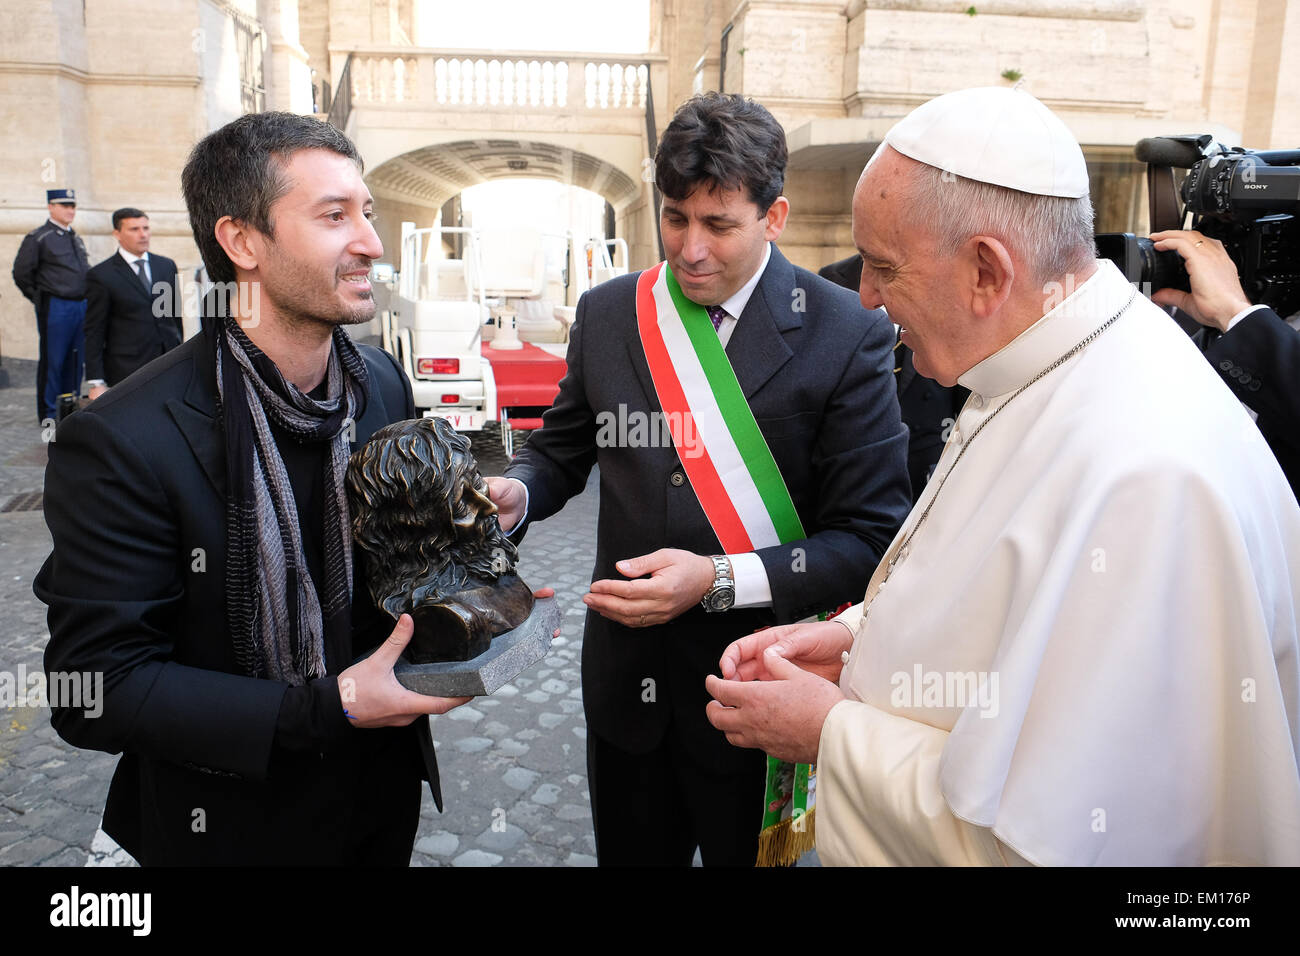 Vatikanstadt 15. April 2015 Papst Francis General Audience in St Peter's Square Credit: wirklich Easy Star/Alamy Live News Stockfoto